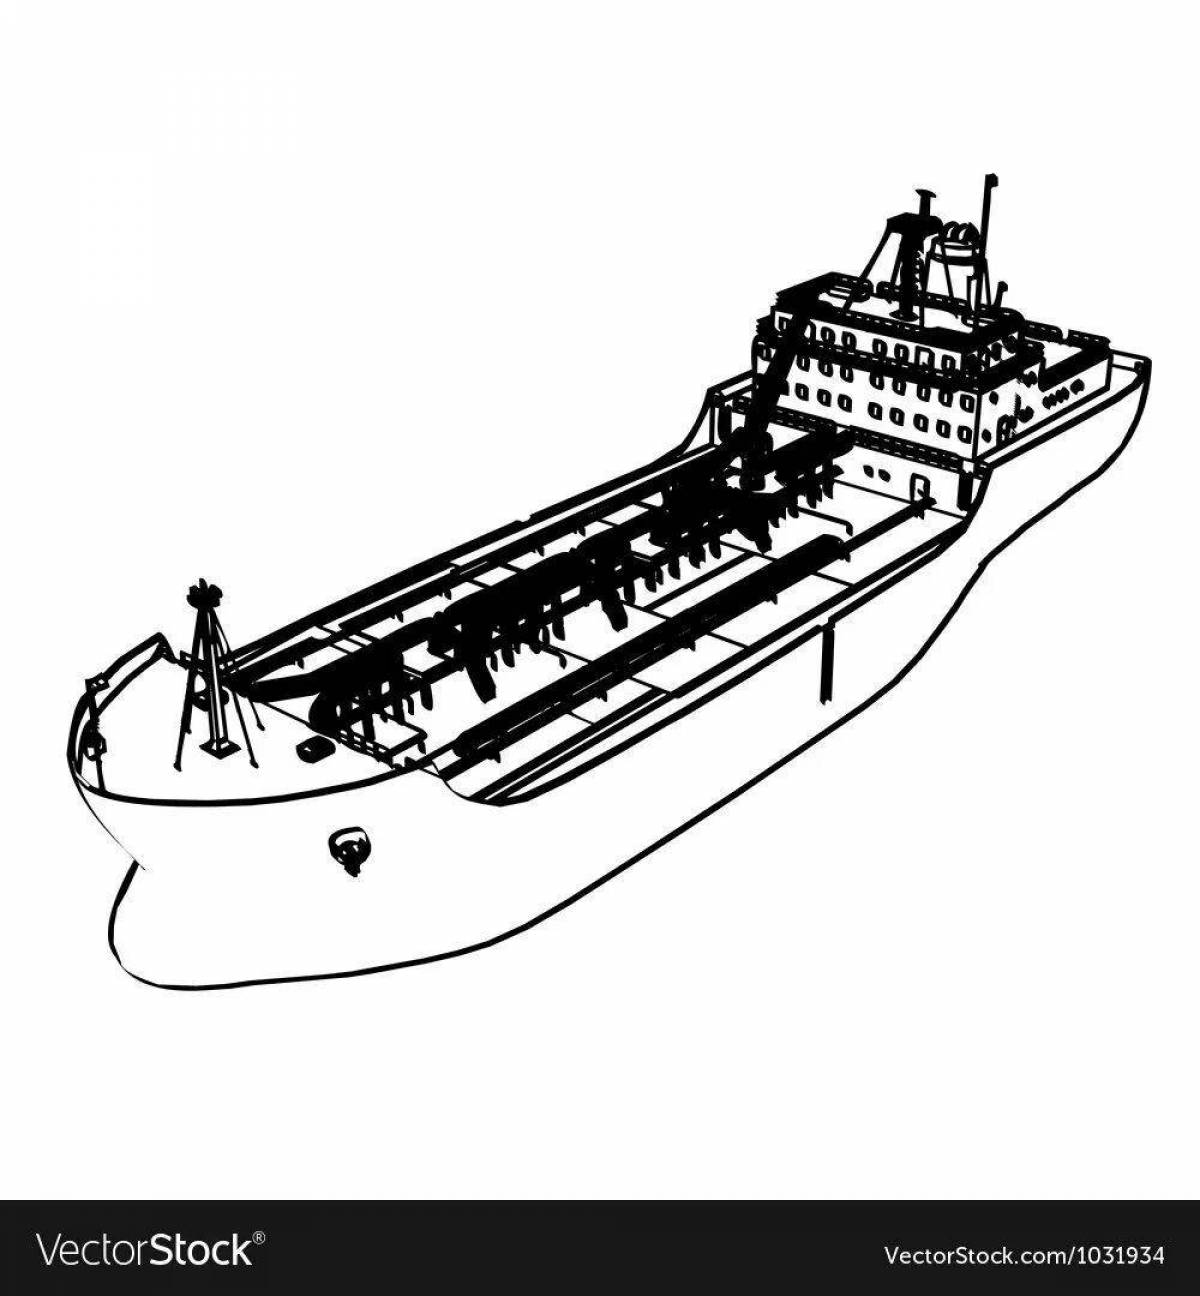 Majestic tanker coloring page